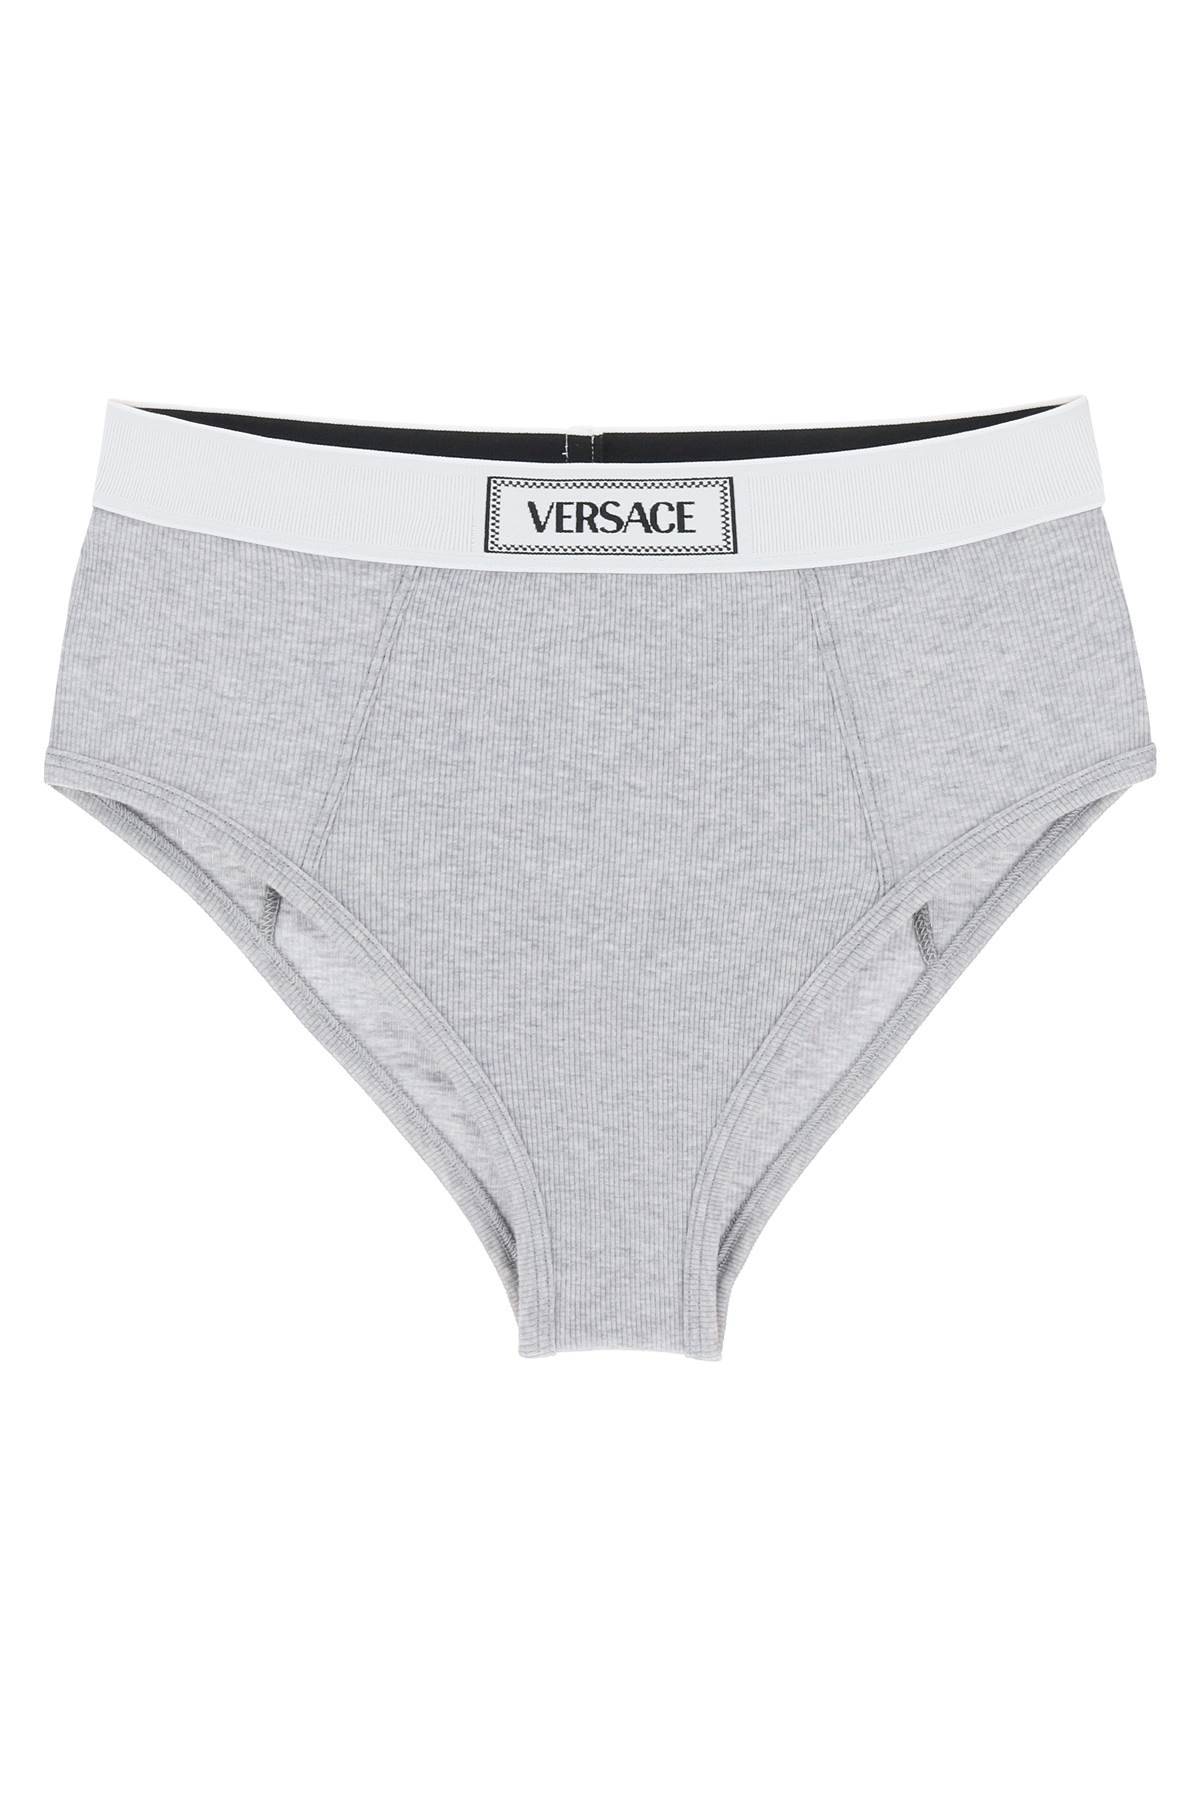 VERSACE ribbed briefs with '90s logo